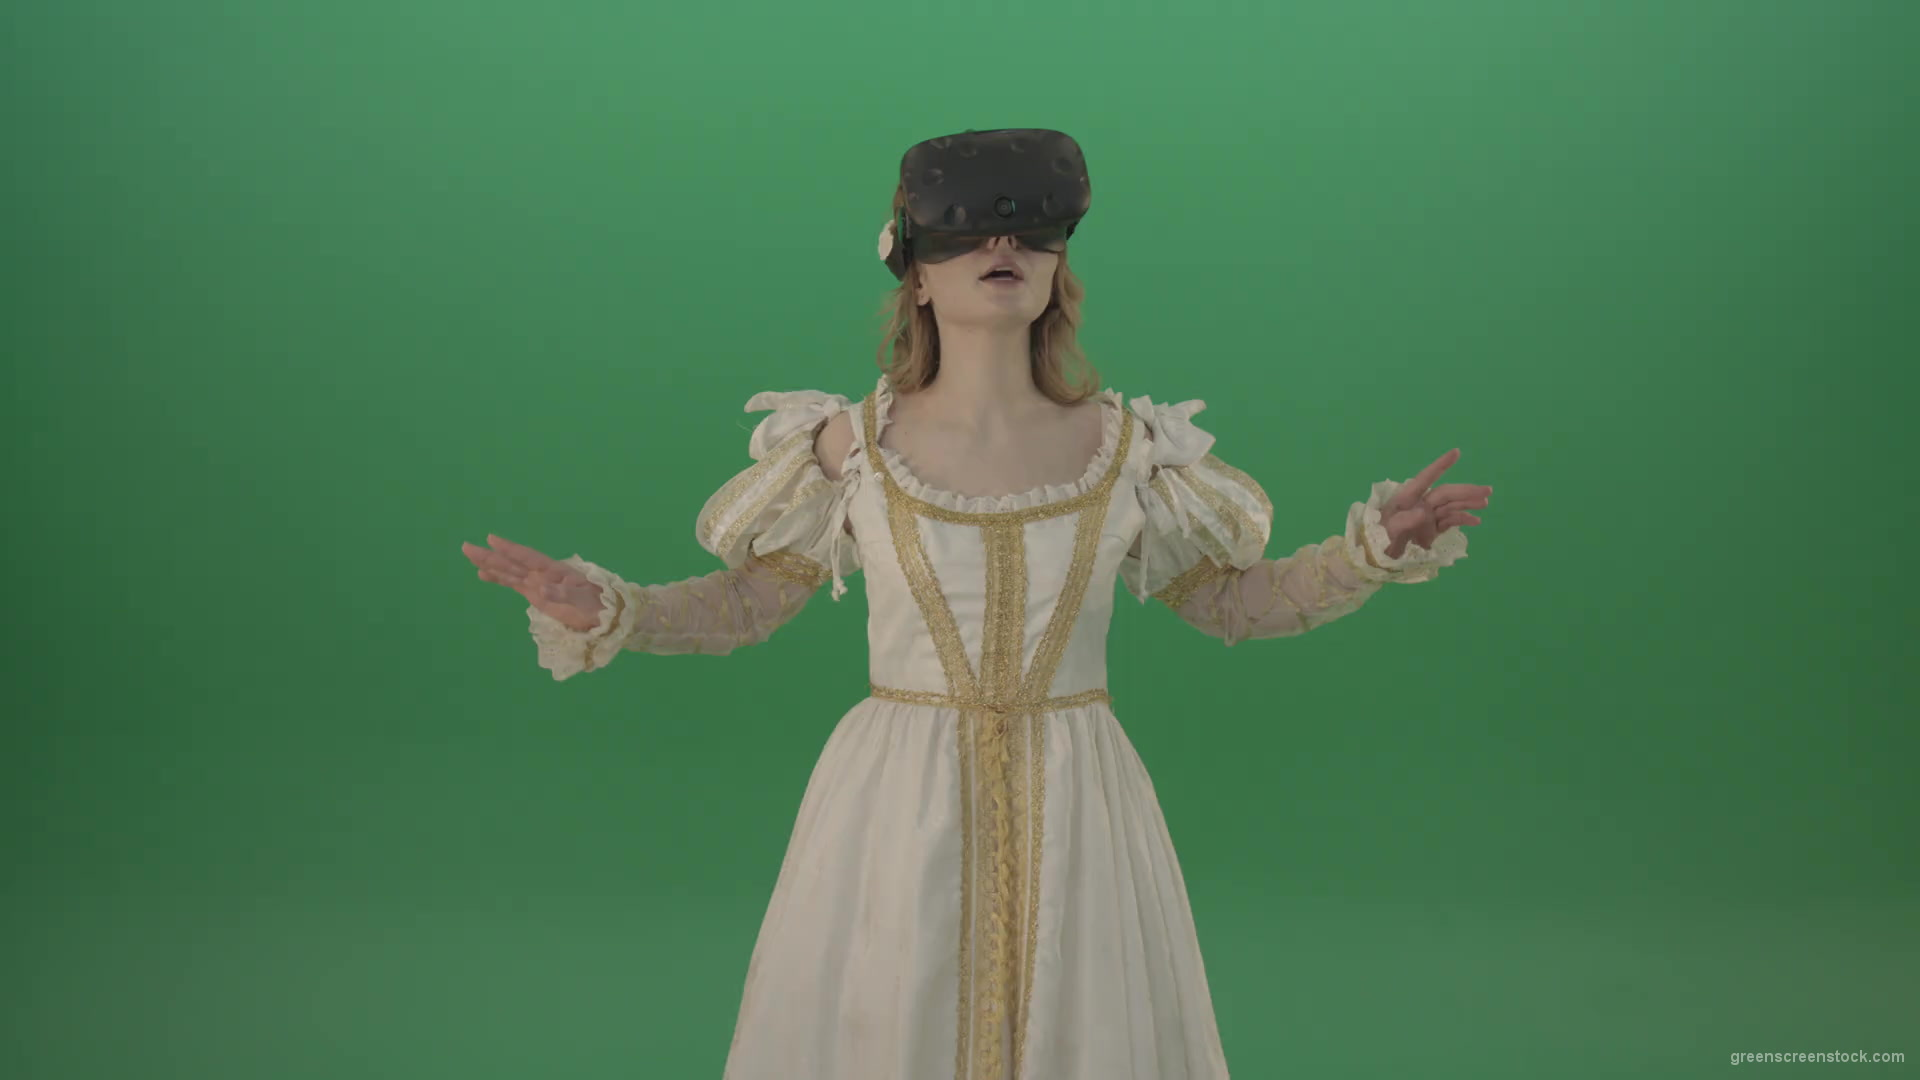 Girl-in-3-in-virtual-reality-has-swallowed-up-in-another-three-dimensional-world-isolated-on-green-screen-1920_001 Green Screen Stock